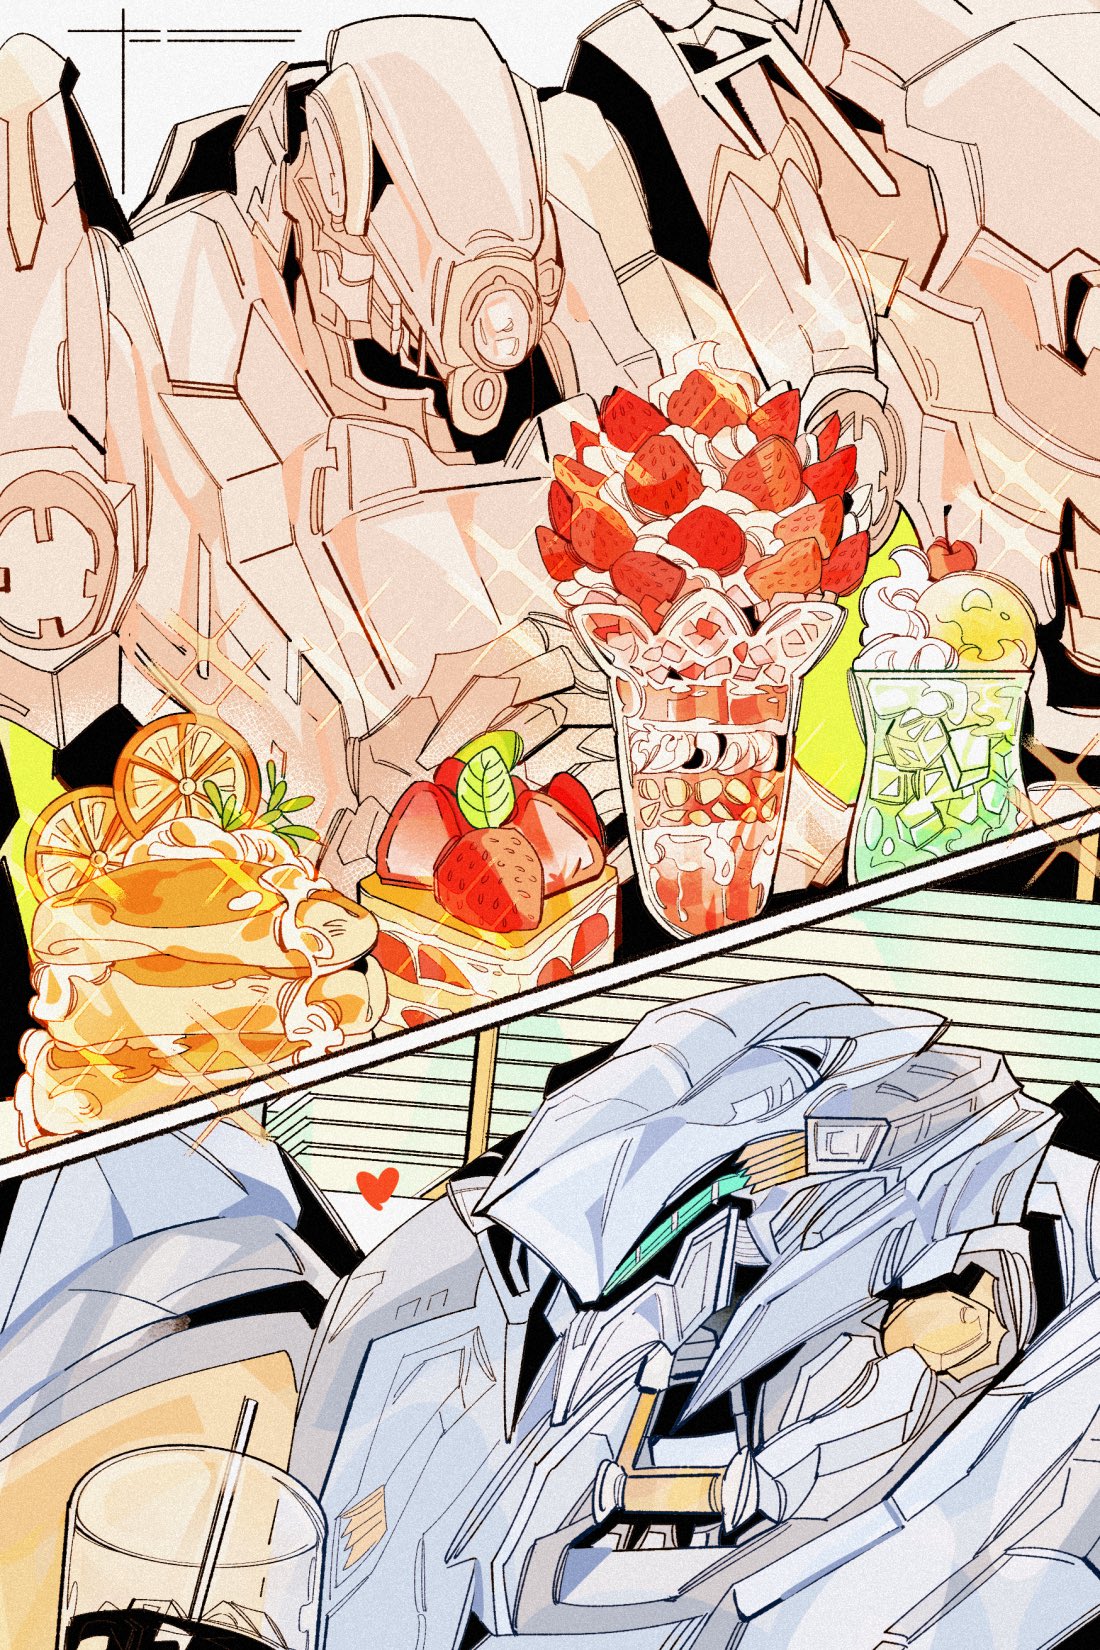 armored_core armored_core_6 cake cup drenched-in-sunlight drinking_straw food fruit heart highres loader_4 mecha mecha_focus no_humans one-eyed orange_(fruit) parfait robot science_fiction steel_haze strawberry upper_body whipped_cream